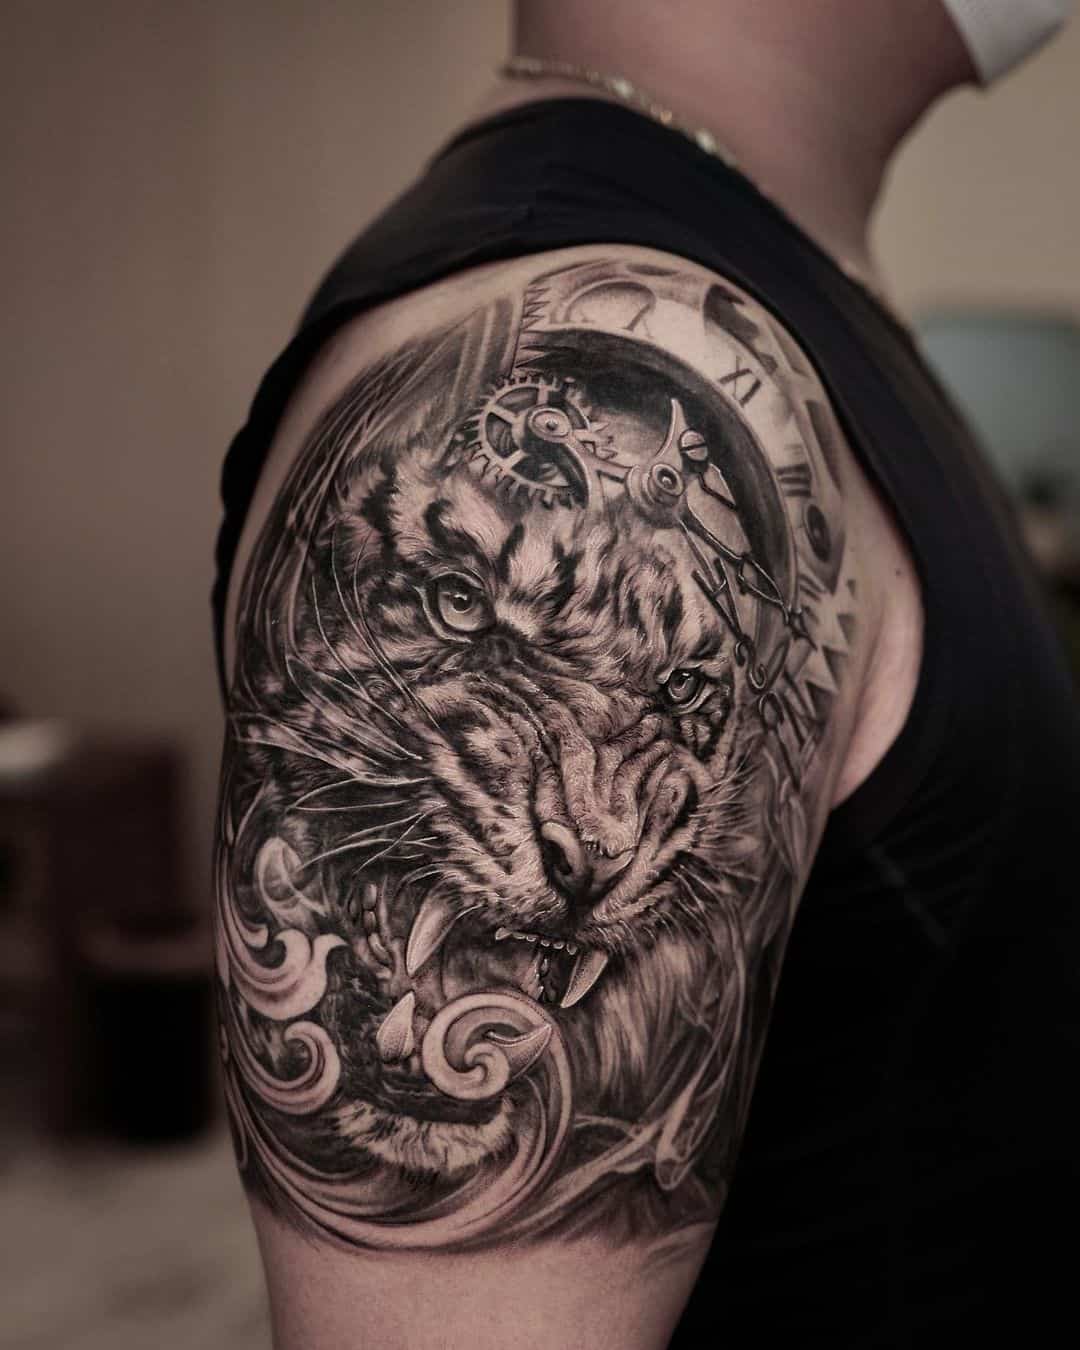 Roaring tiger on upper arm by zo gang tattoo